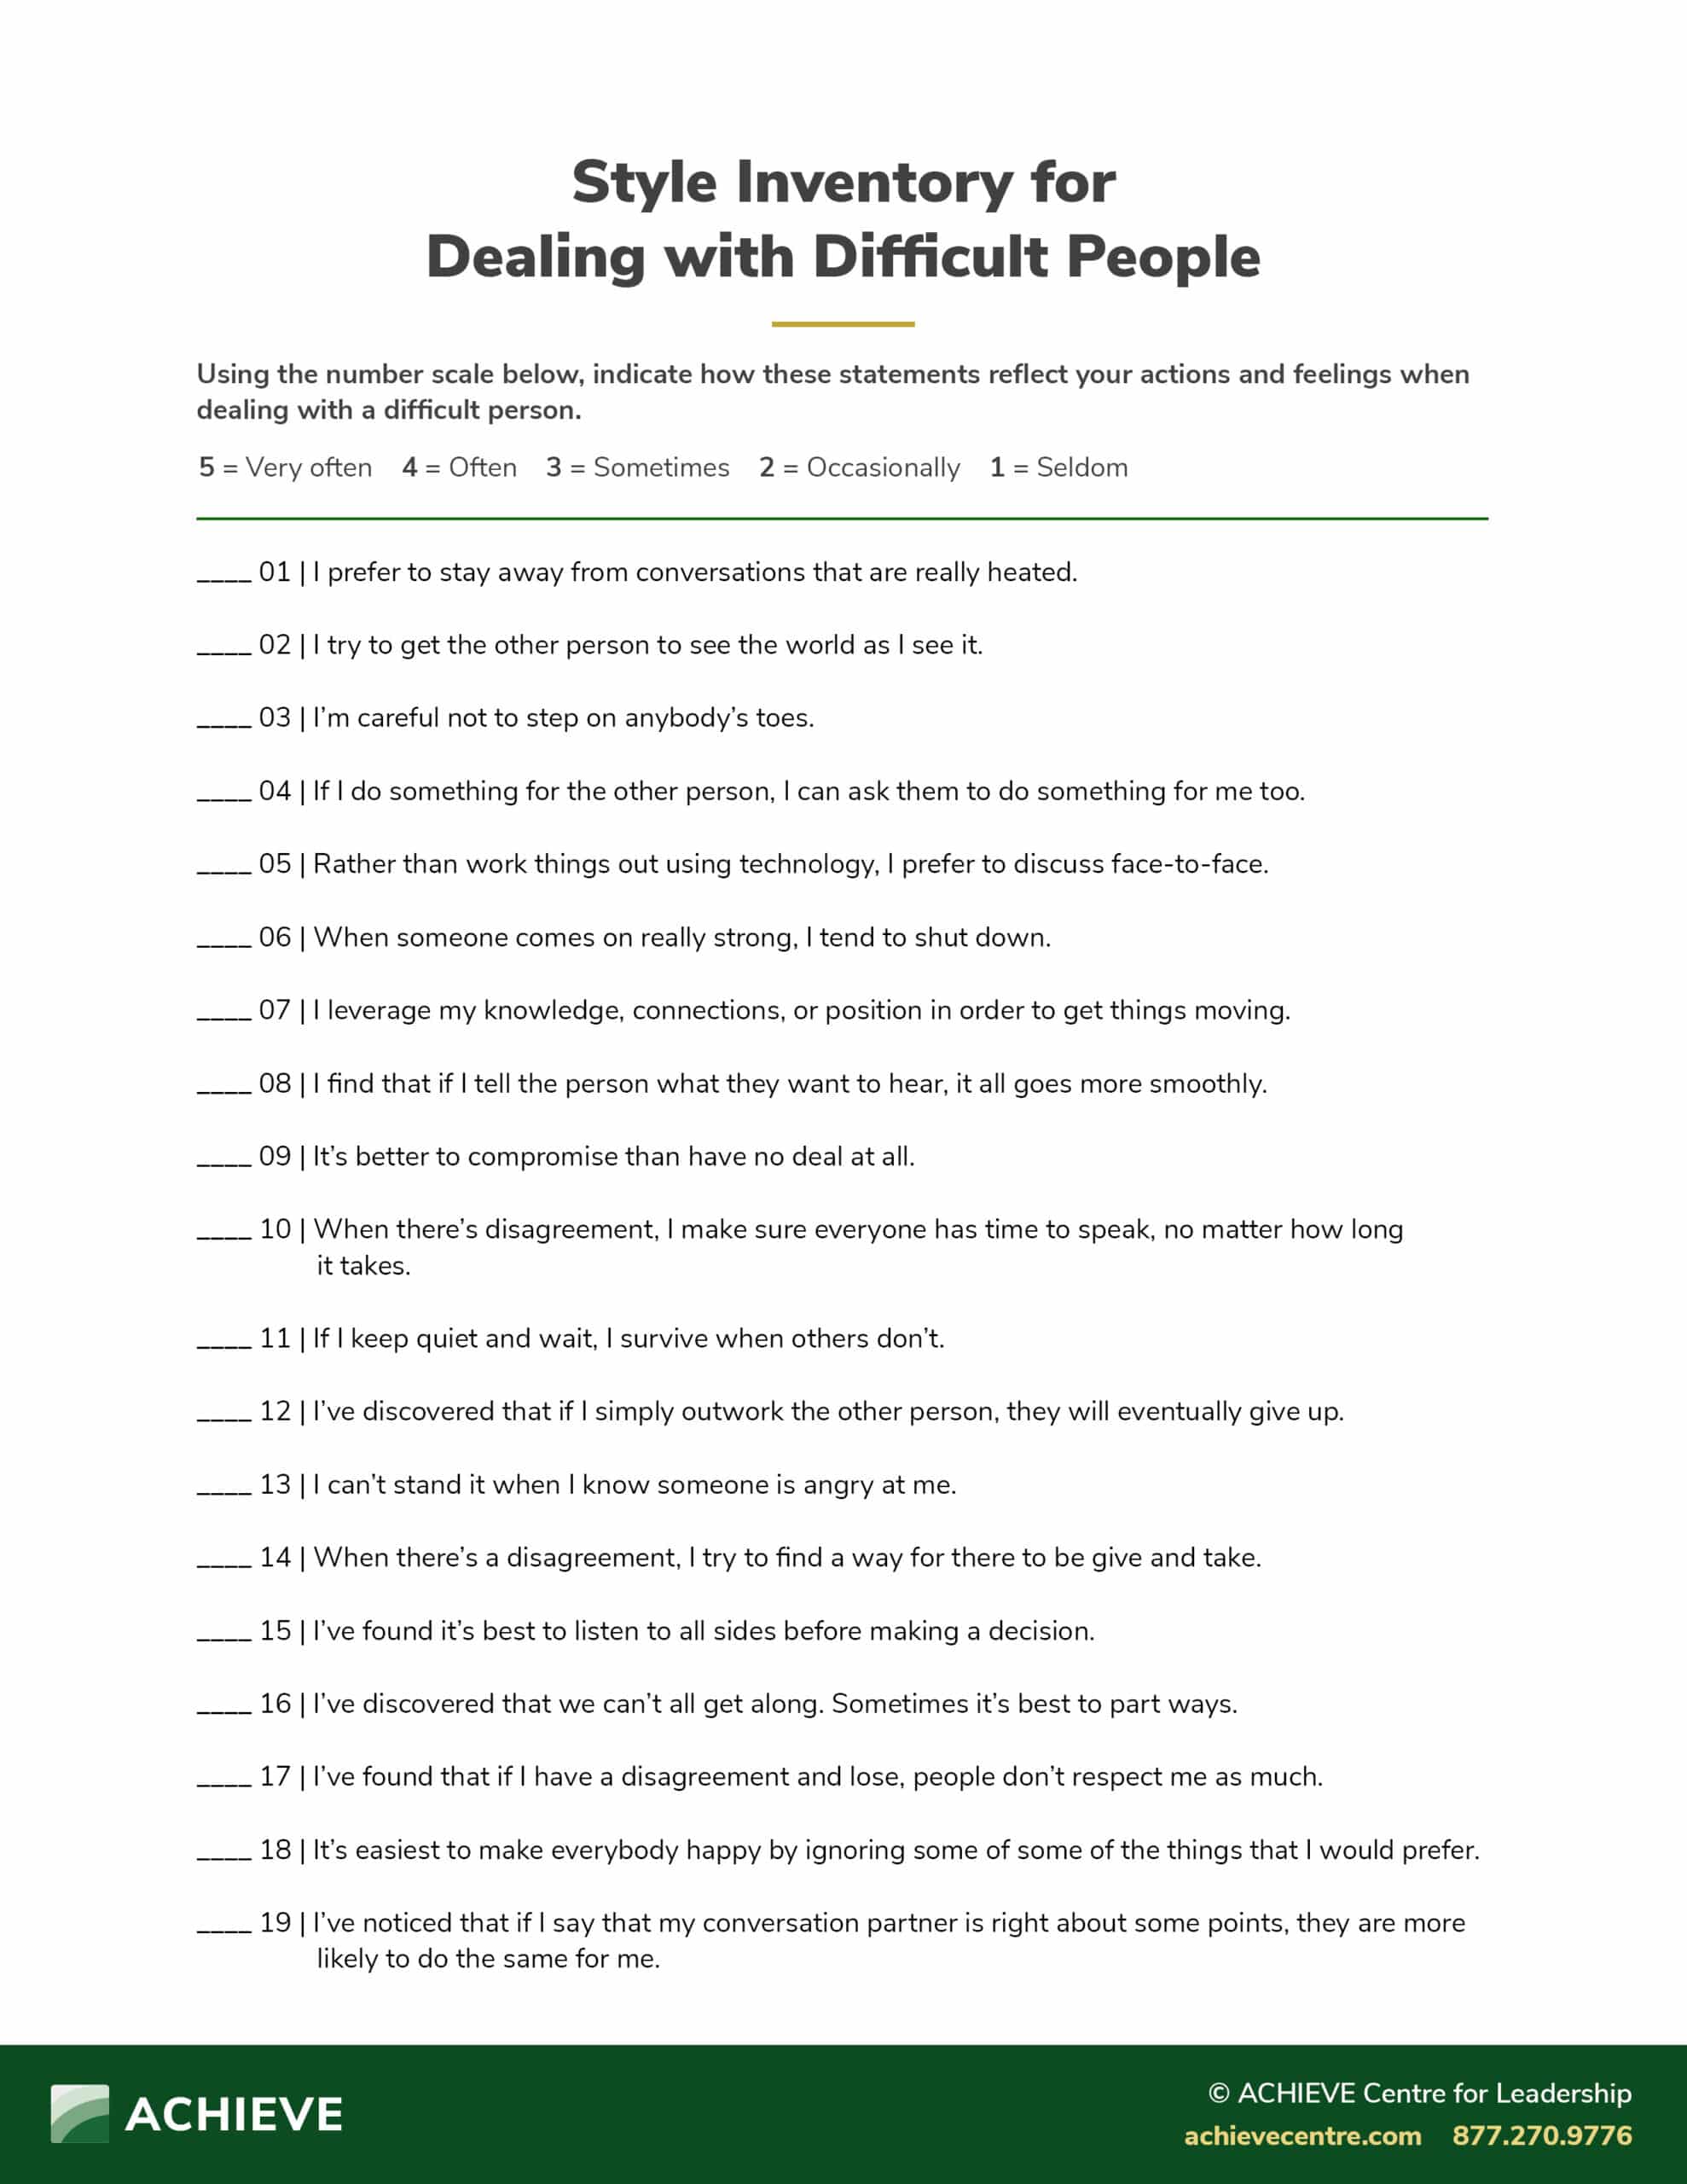 Style Inventory for Dealing with Difficult People3